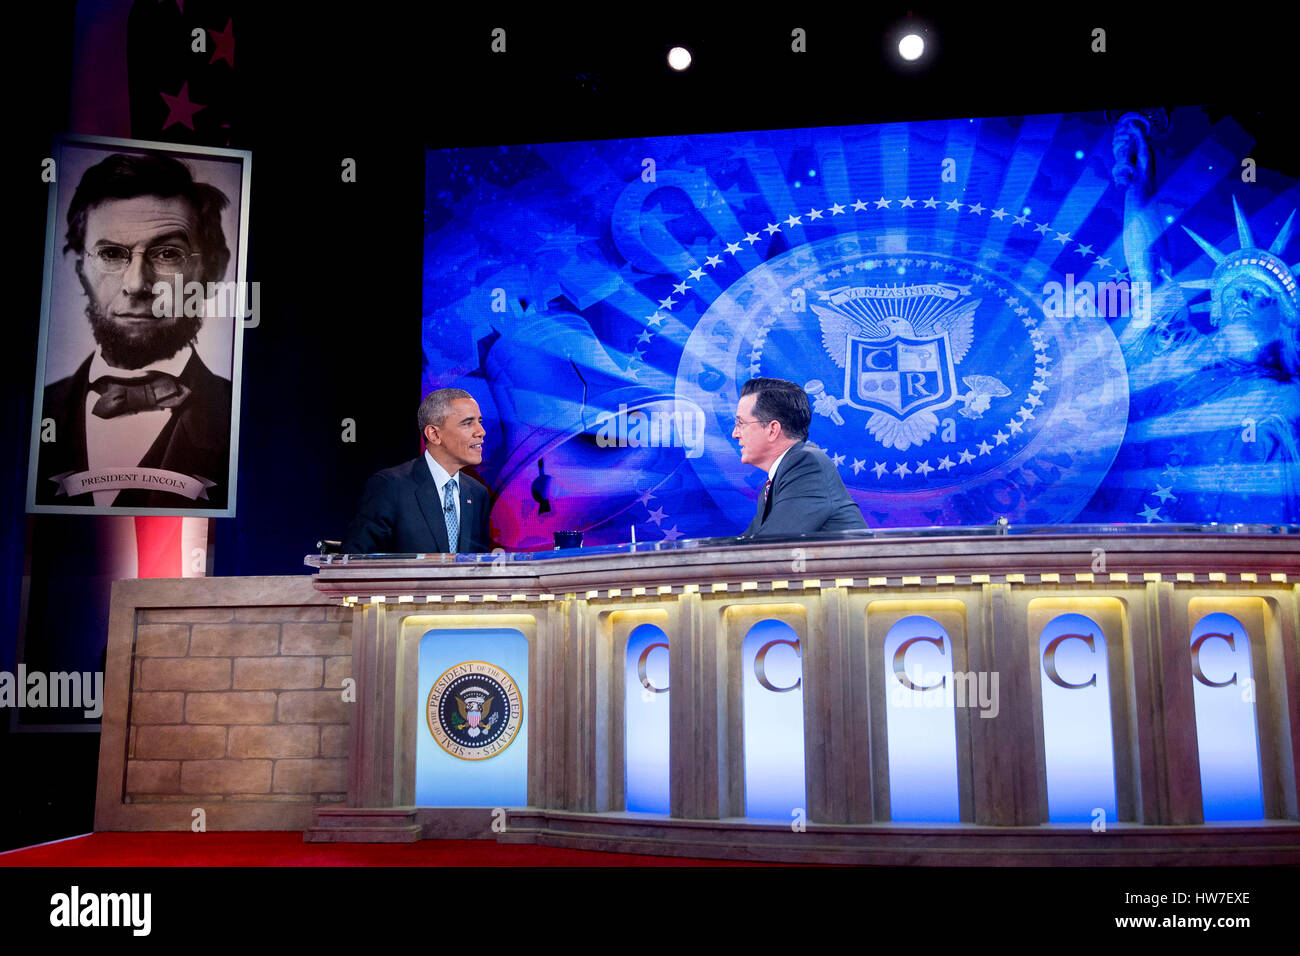 United States President Barack Obama left talks to television personality Stephen Colbert during taping of Comedy Central's 'The Colbert Report' in Lisner Auditorium on the campus of George Washington University in Washington D.C. U.S. on Monday December Stock Photo